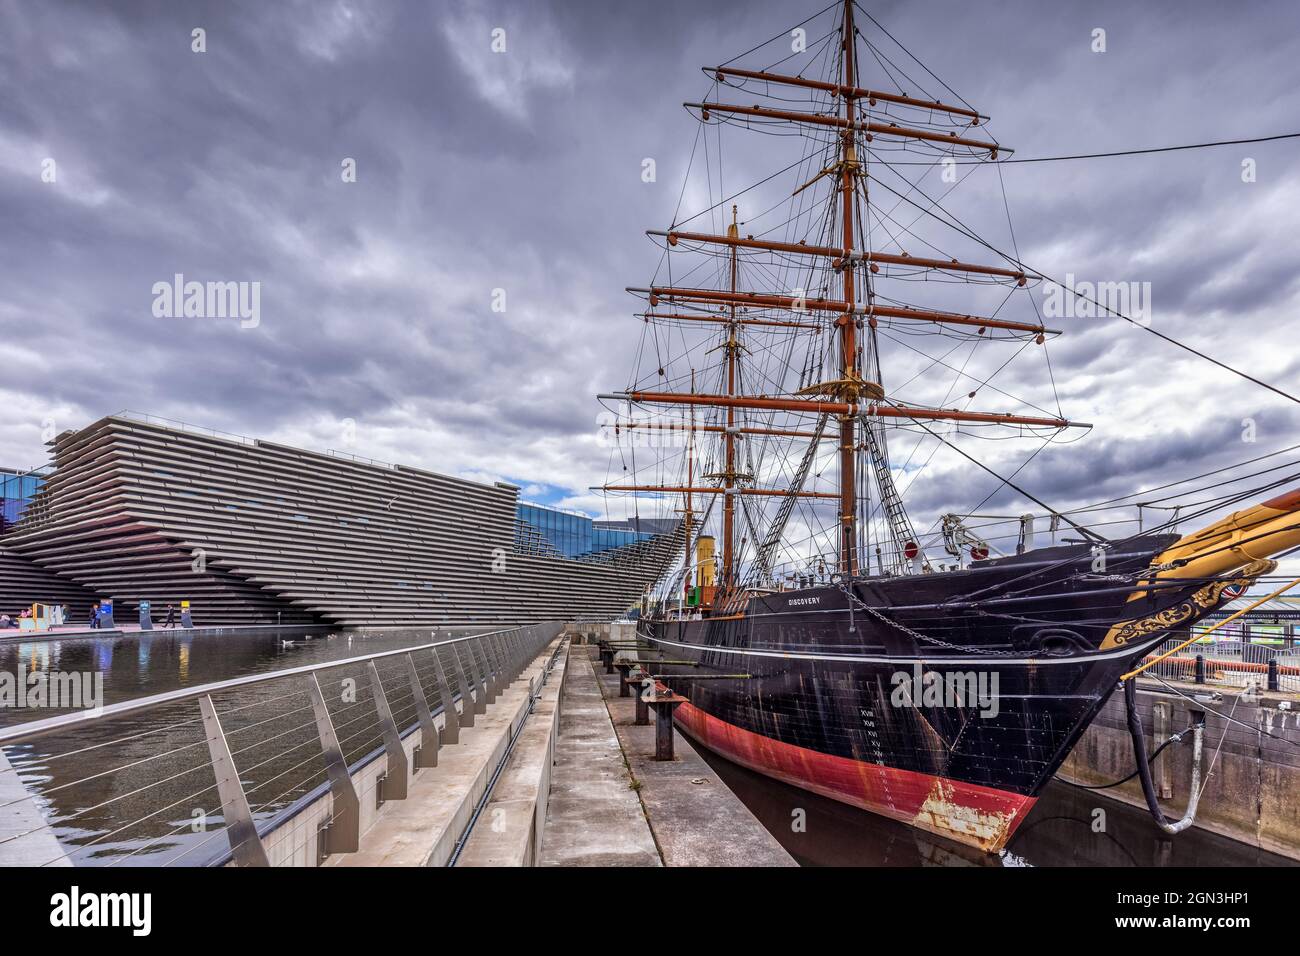 The auxiliary steamship RRS Discovery that took Scott and Shackleton to Antartica in 1901, with the V & A design museum on the Dundee waterfront. Stock Photo